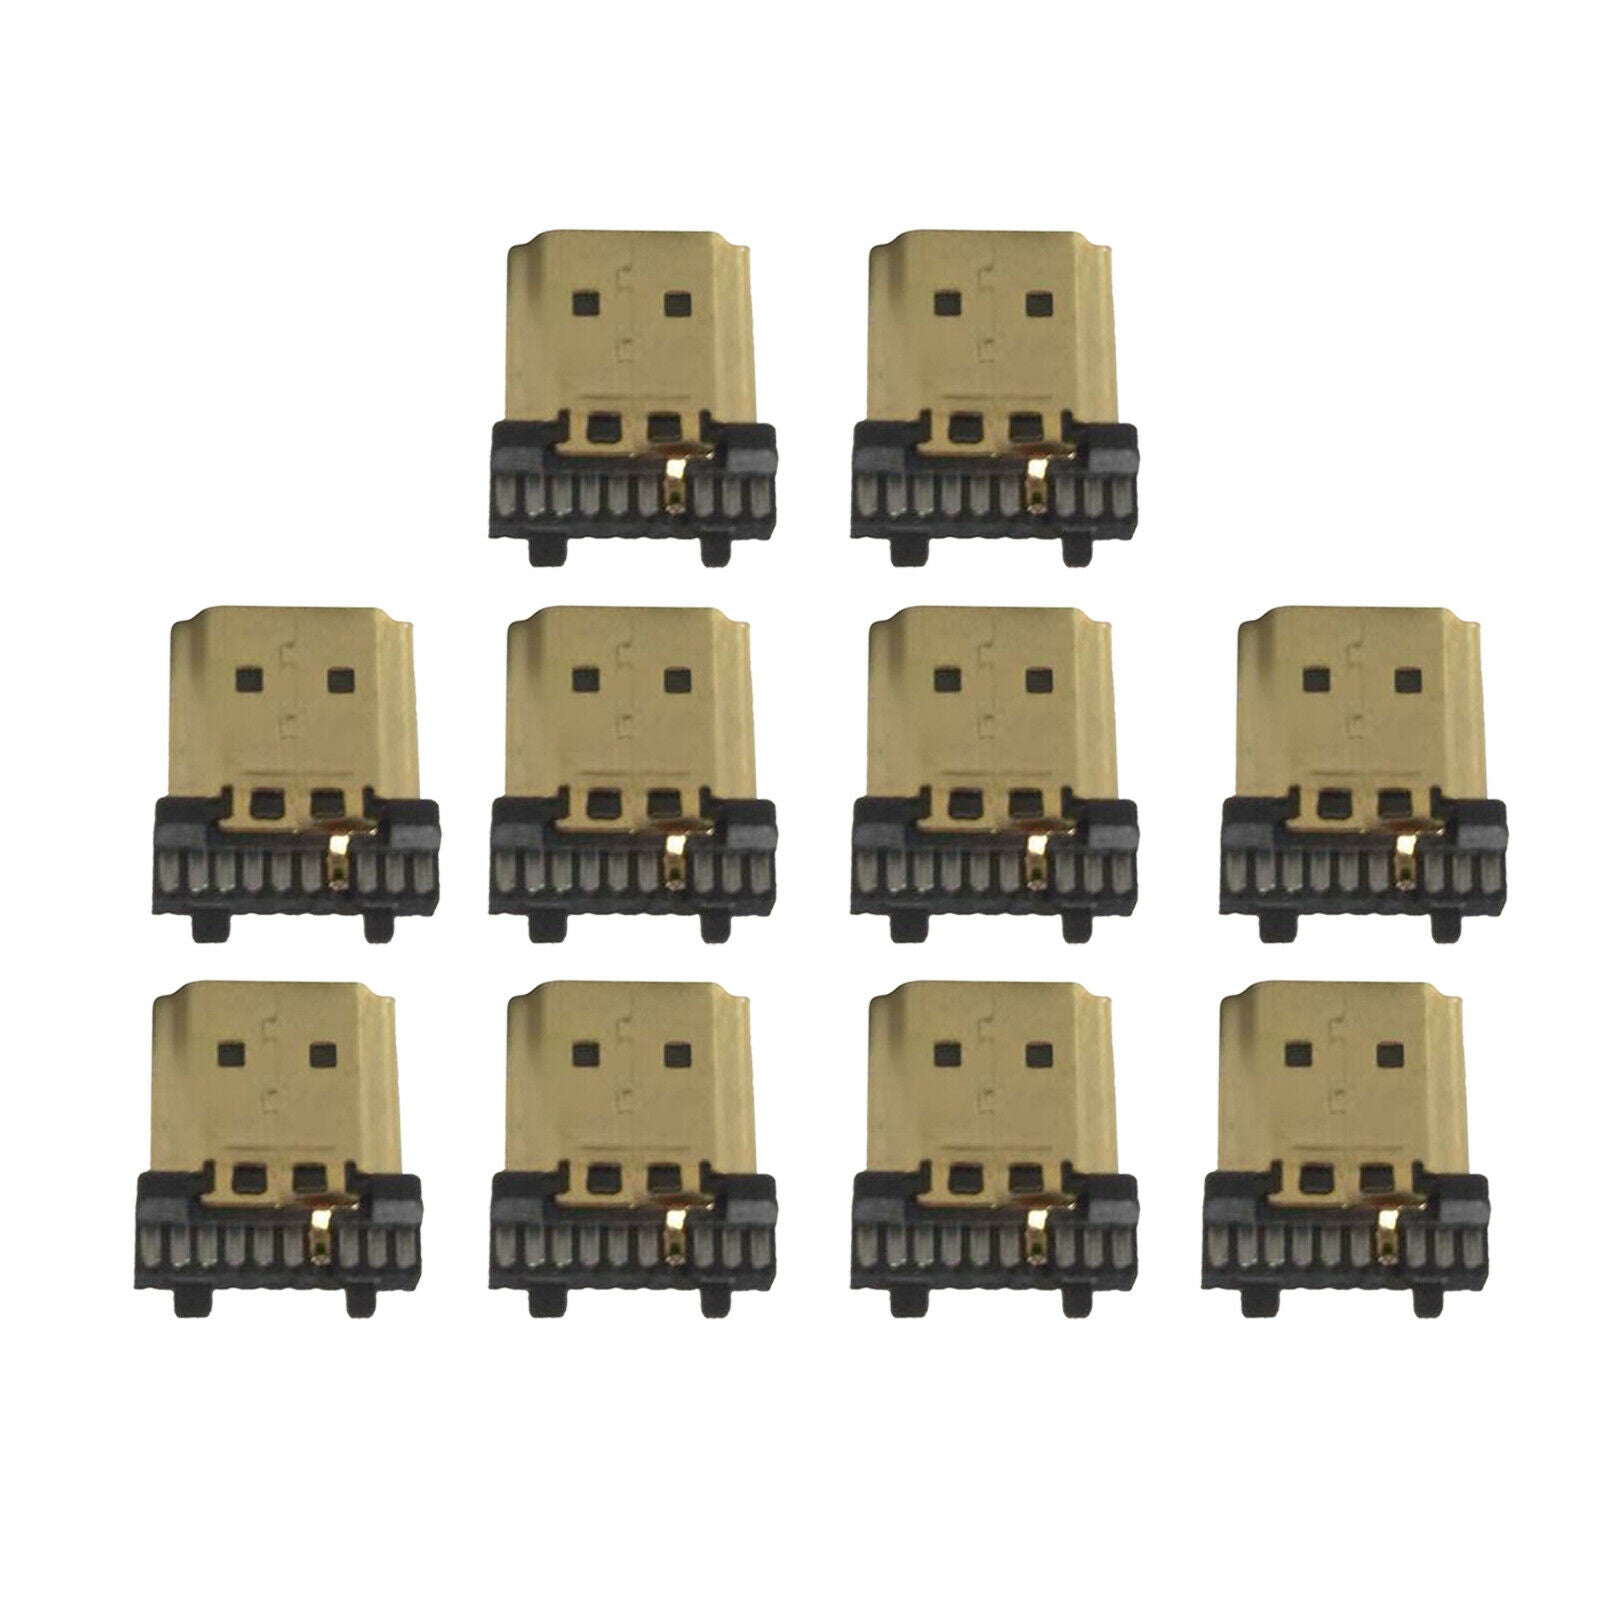 10 Pieces   Male 19Pin Connectors   Termination Replacement Assembly